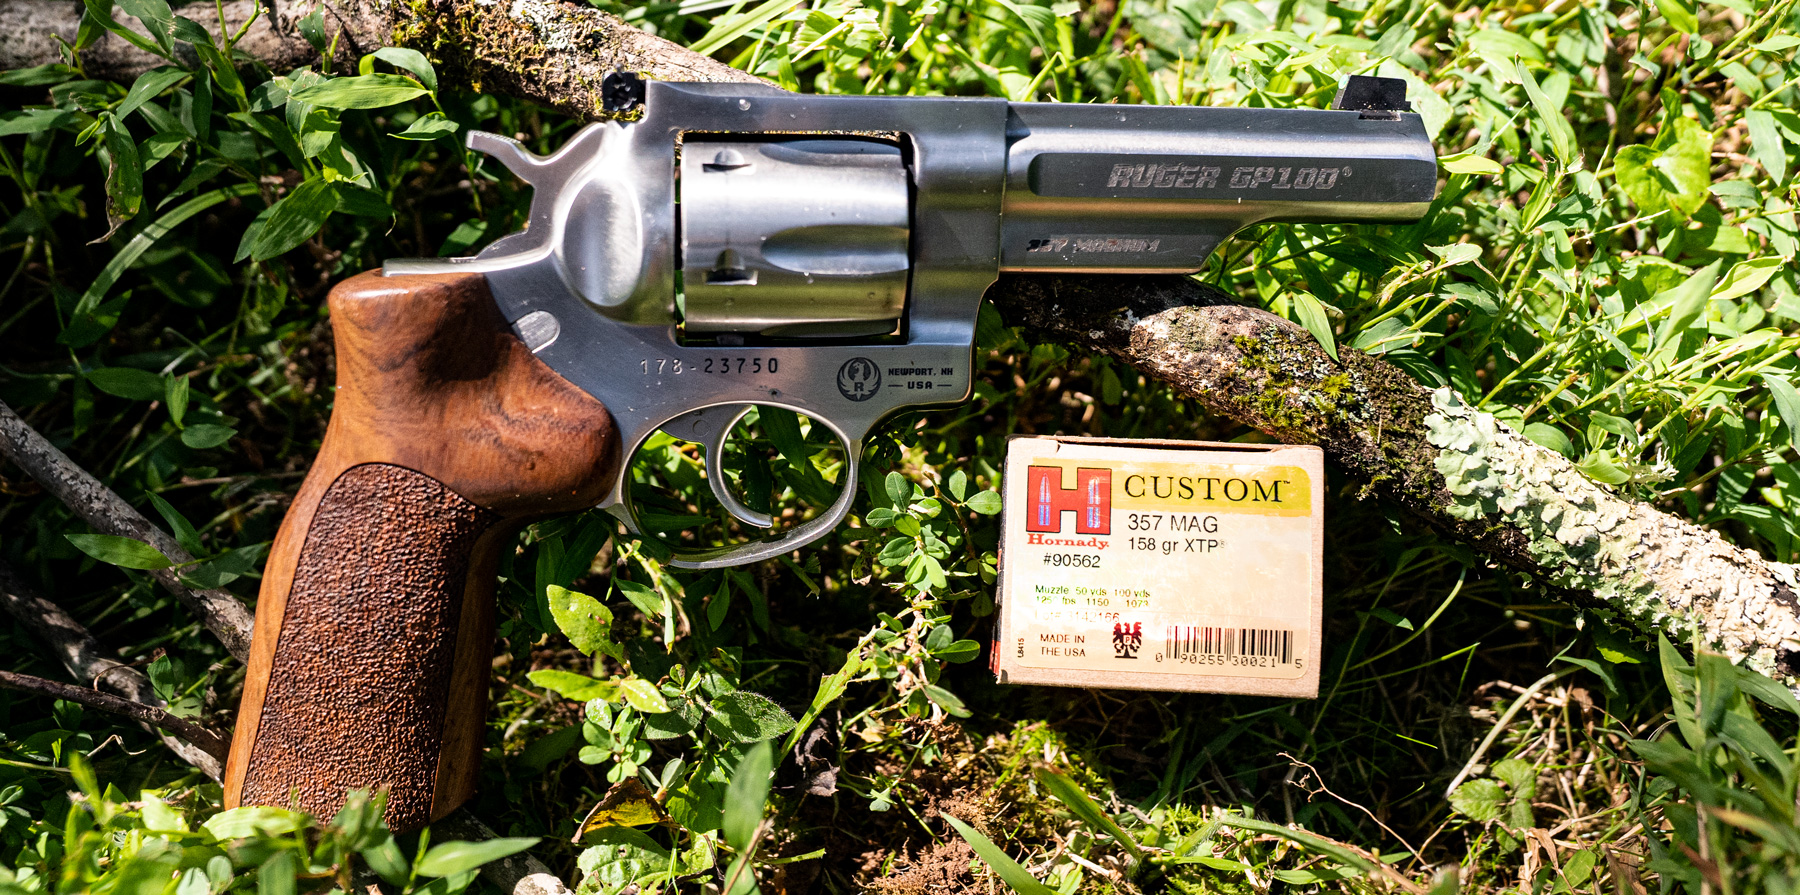 Ruger 357 magnum revolver with Hornady ammo